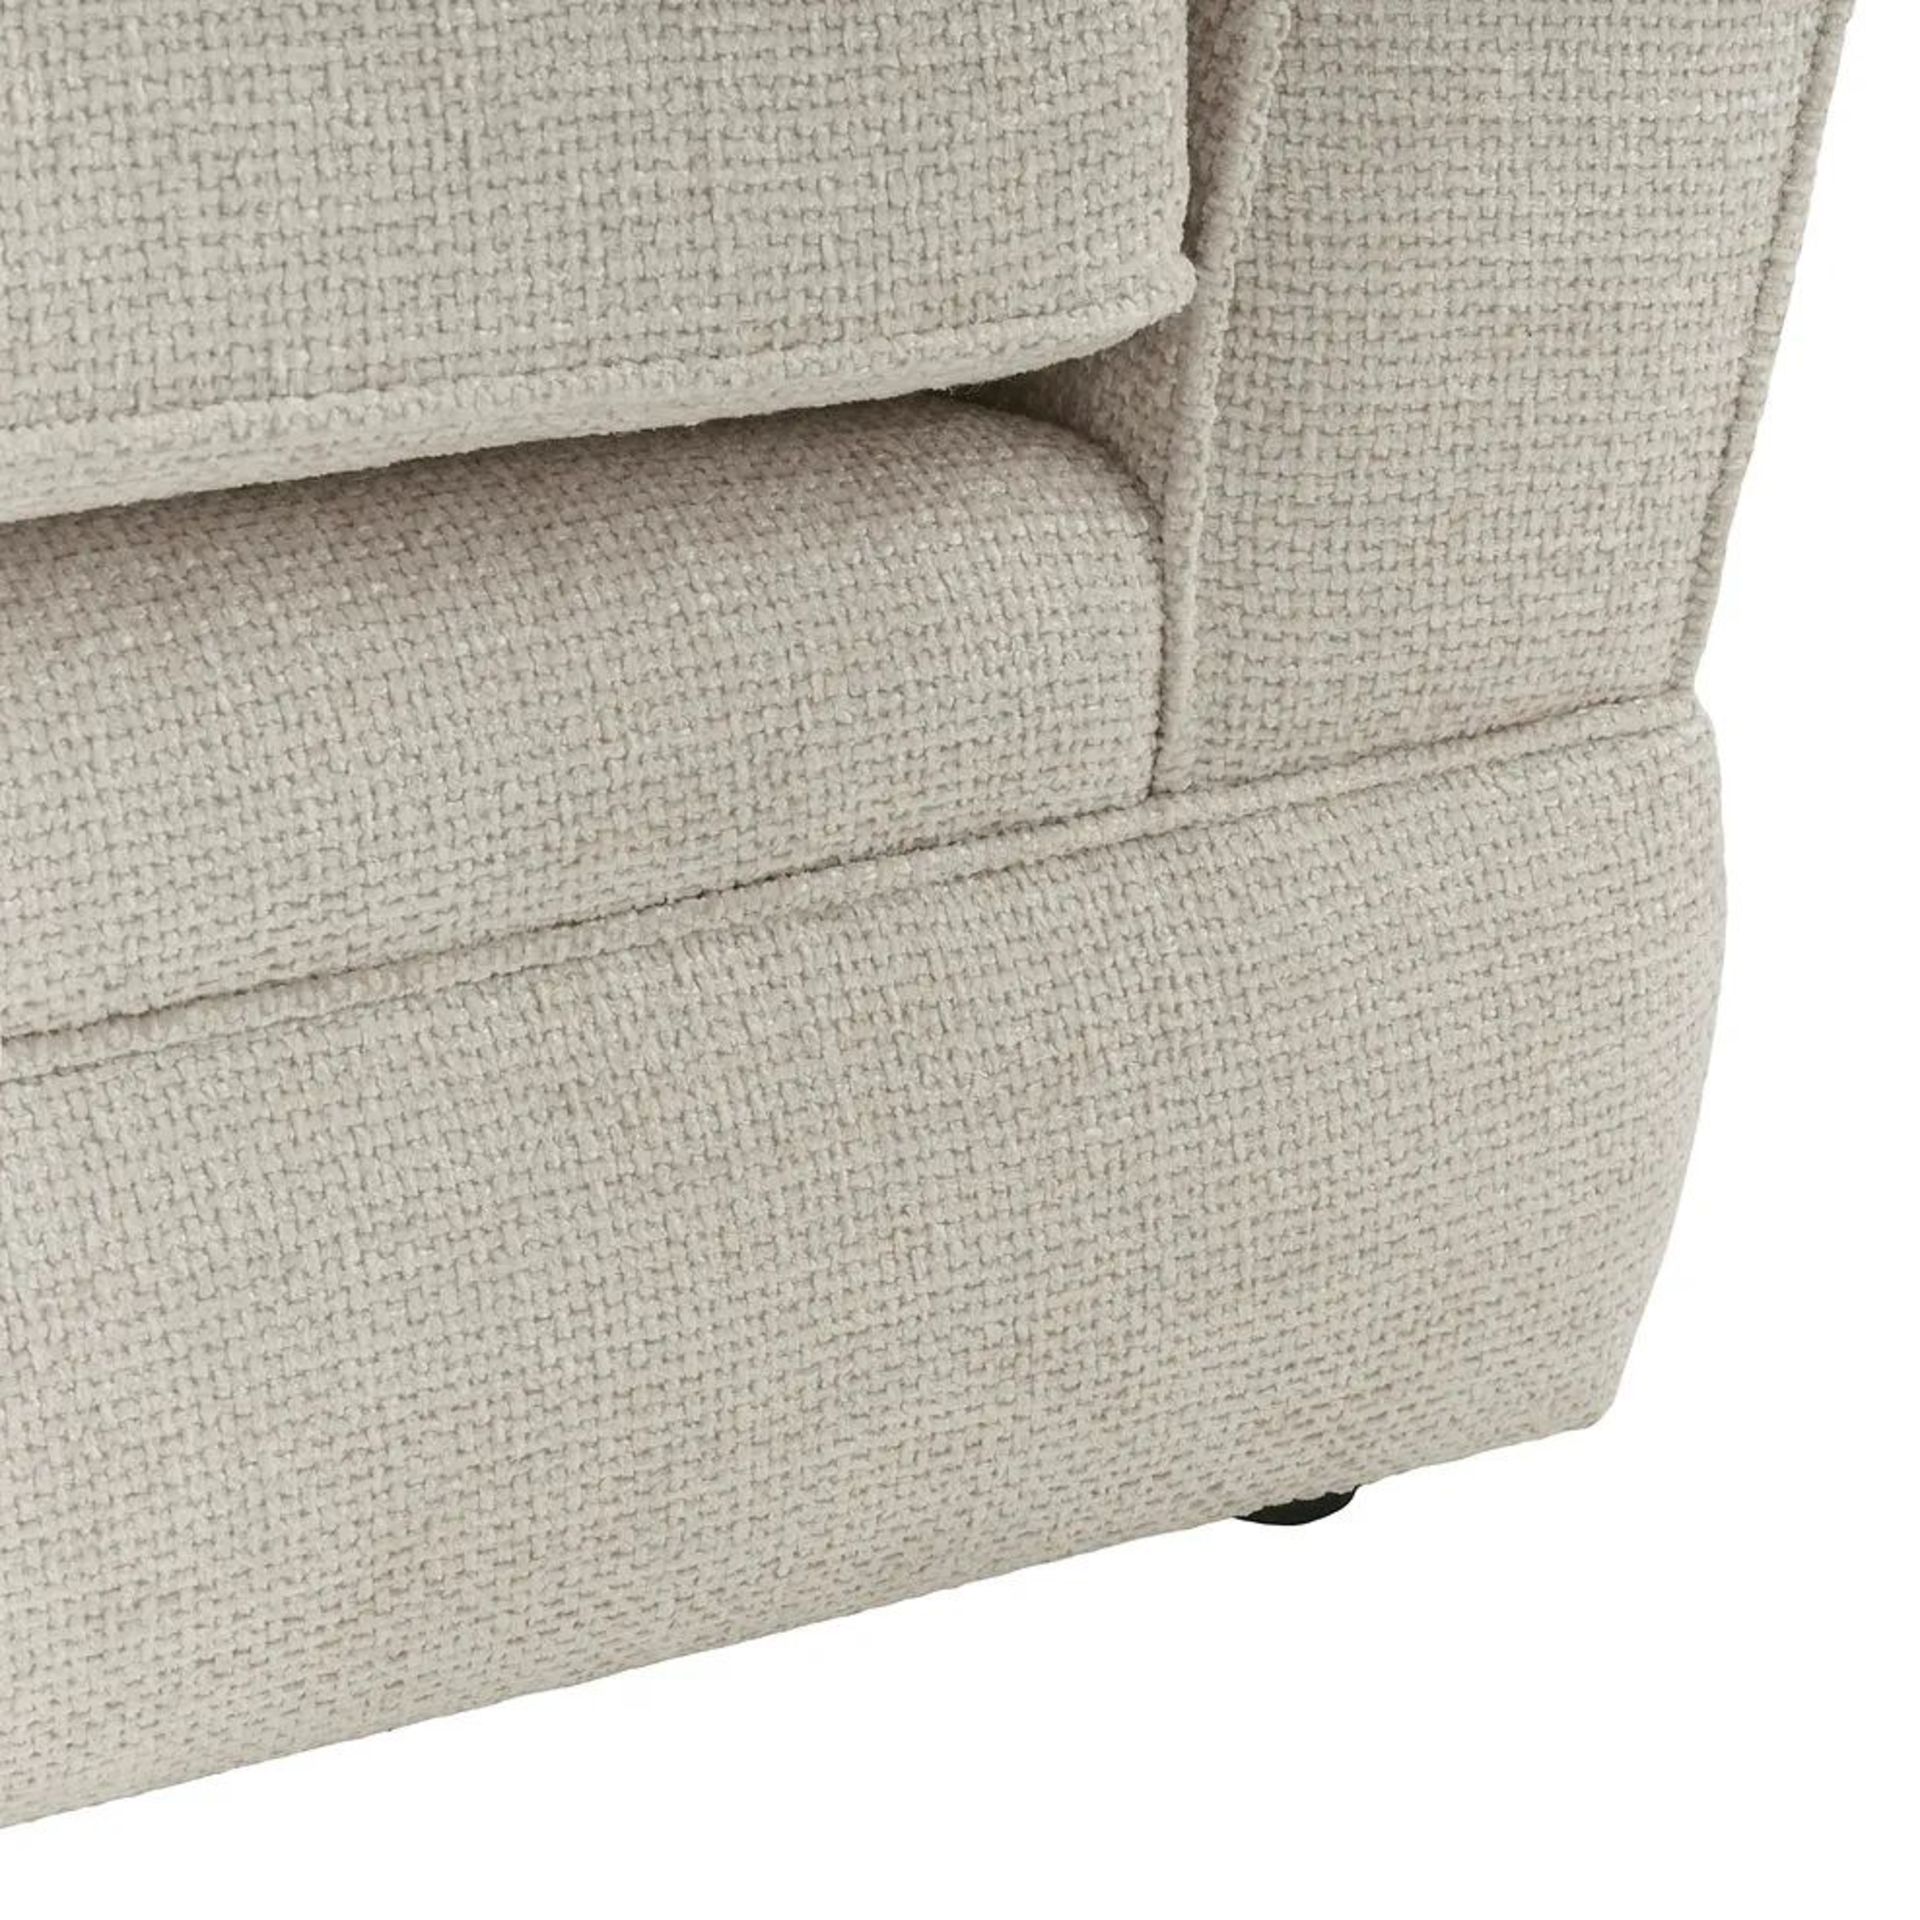 BRAND NEW CARRINGTON 3 Seater Pillow Back Sofa - NATURAL FABRIC. RRP £1099. Make our 3-seater pillow - Image 6 of 8